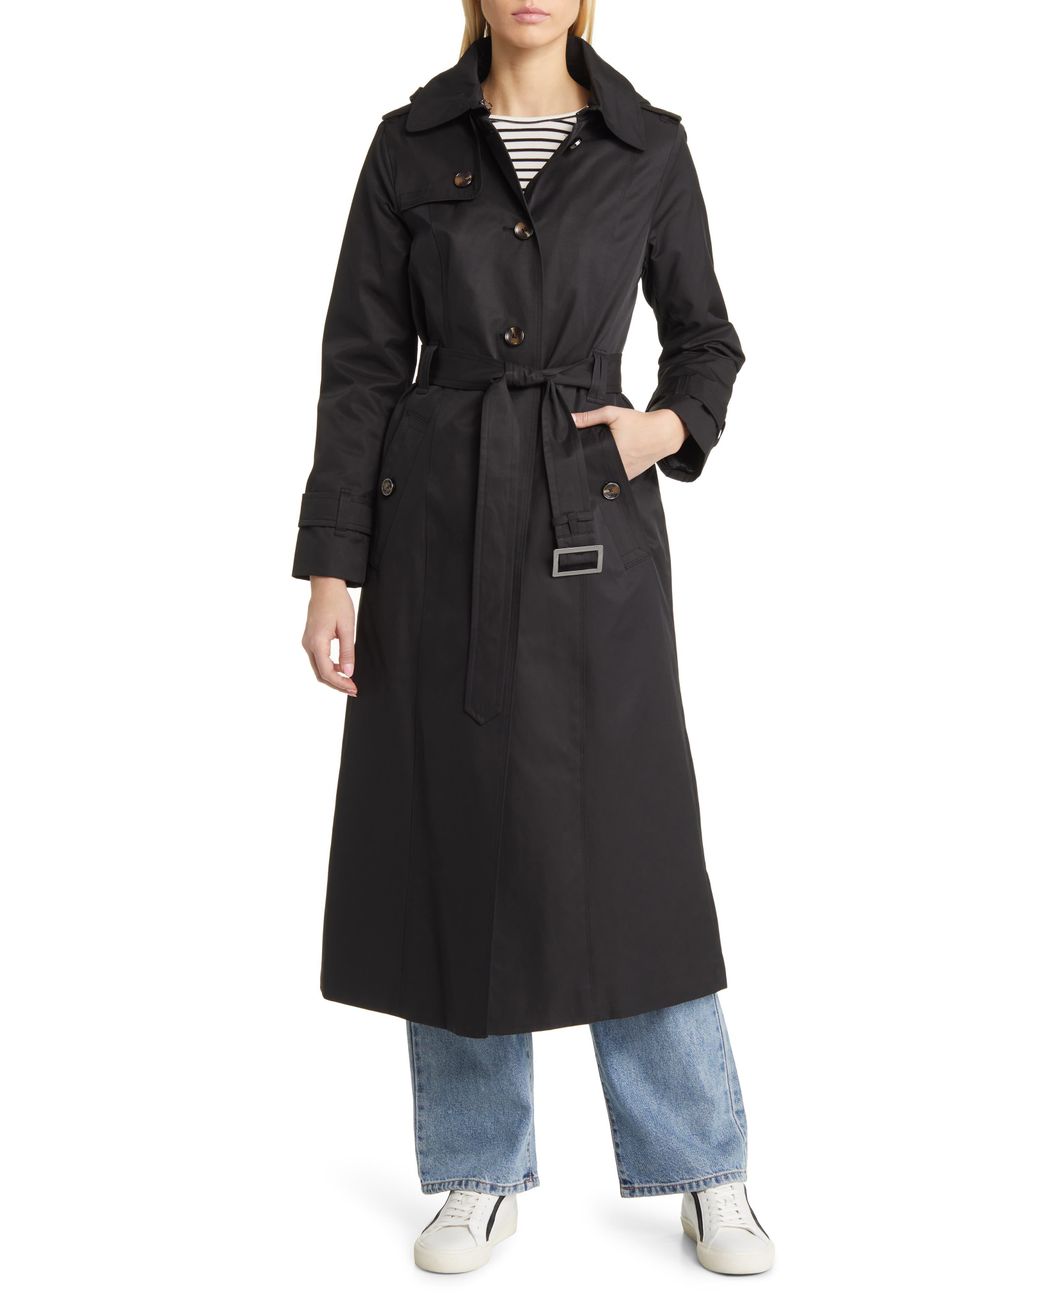 London Fog Missy Single Breasted Hooded Trench Coat in Black | Lyst